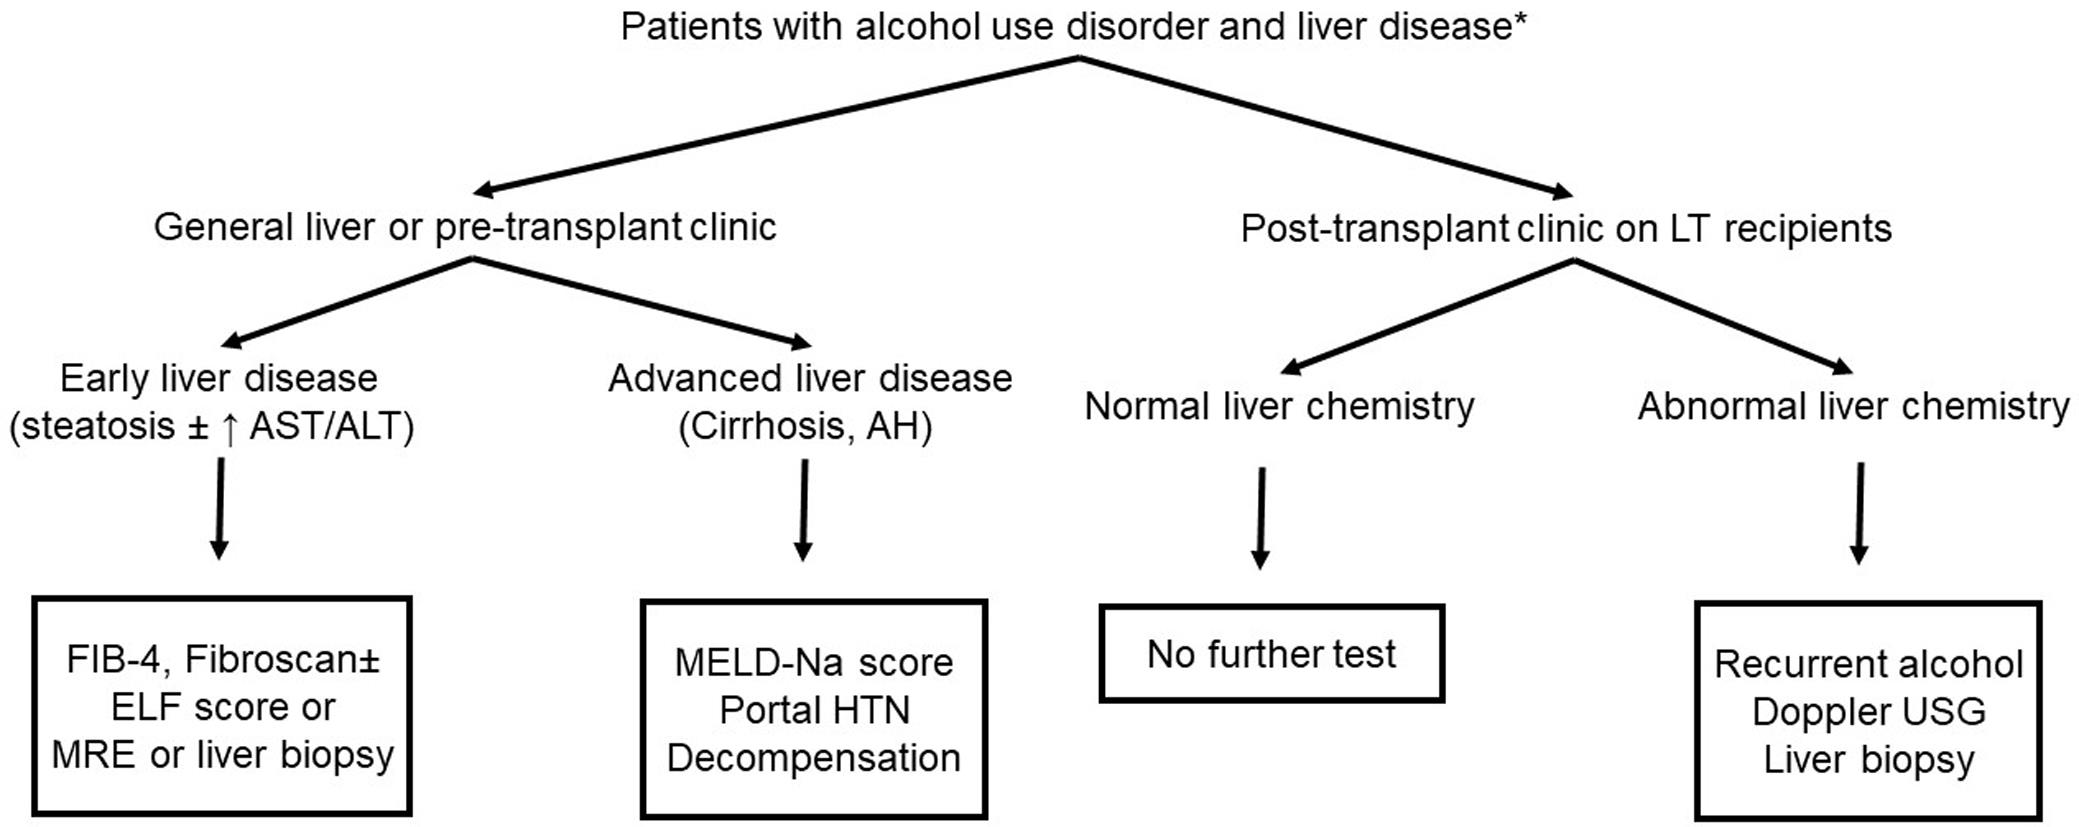 Assessment by liver specialist on patients with alcohol use disorder and liver disease.